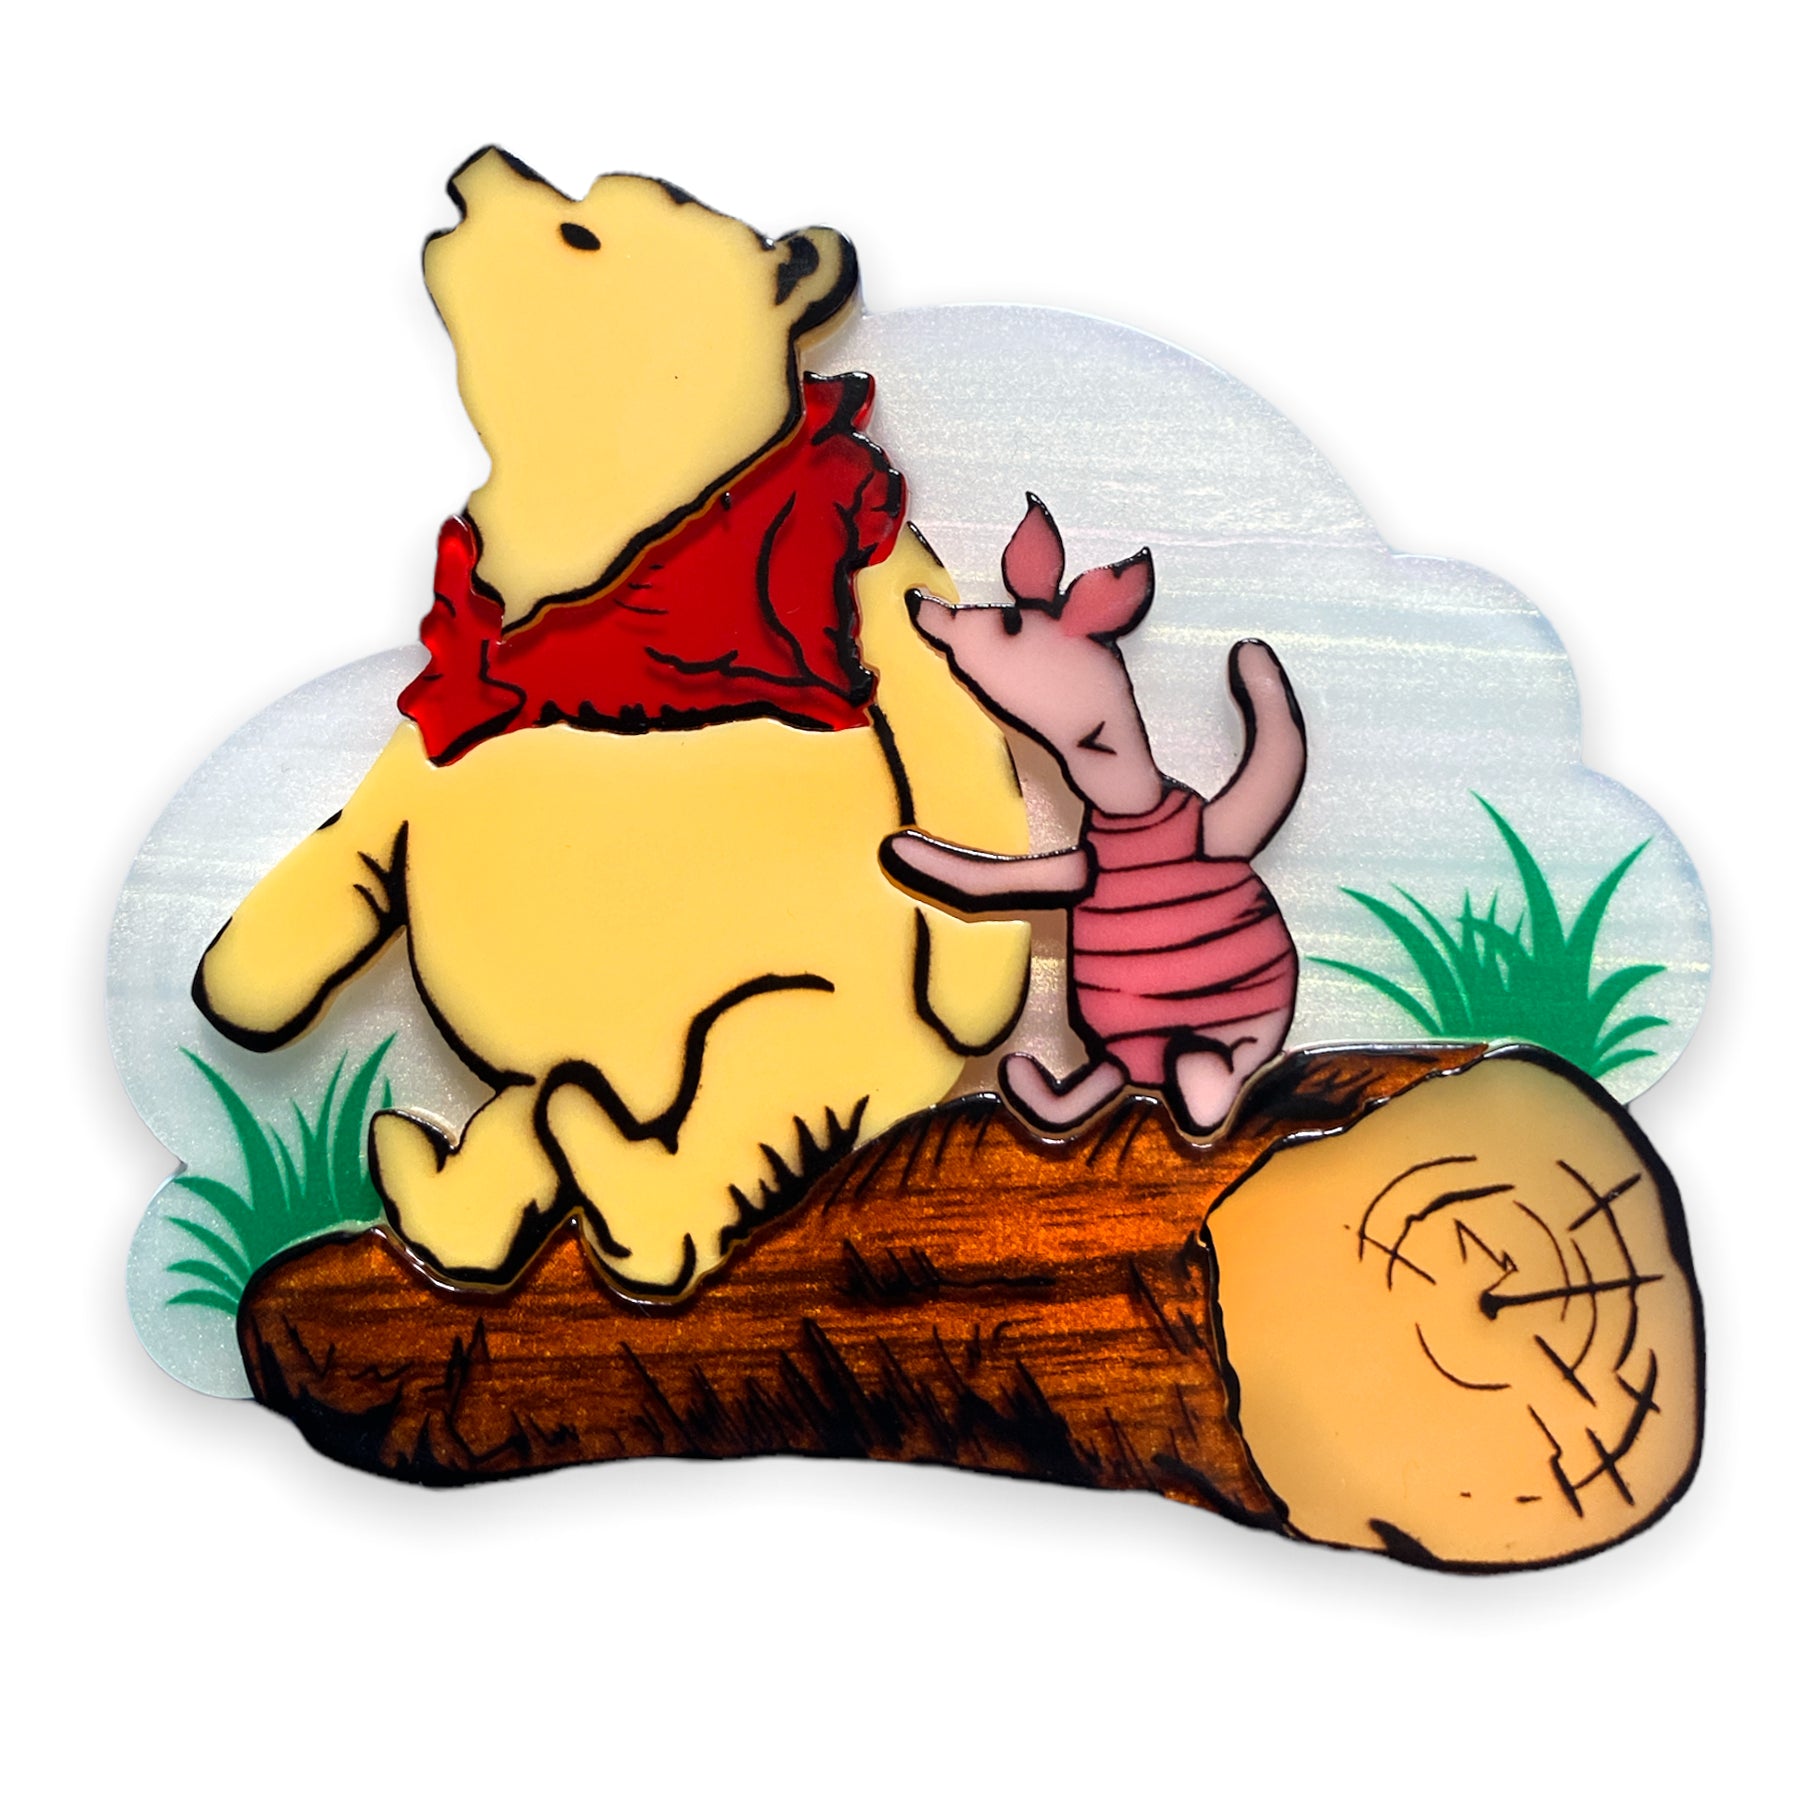 a layered acrylic resin brooch with painted detail showing Winnie the Pooh and Piglet sitting on a log in front of a cloud